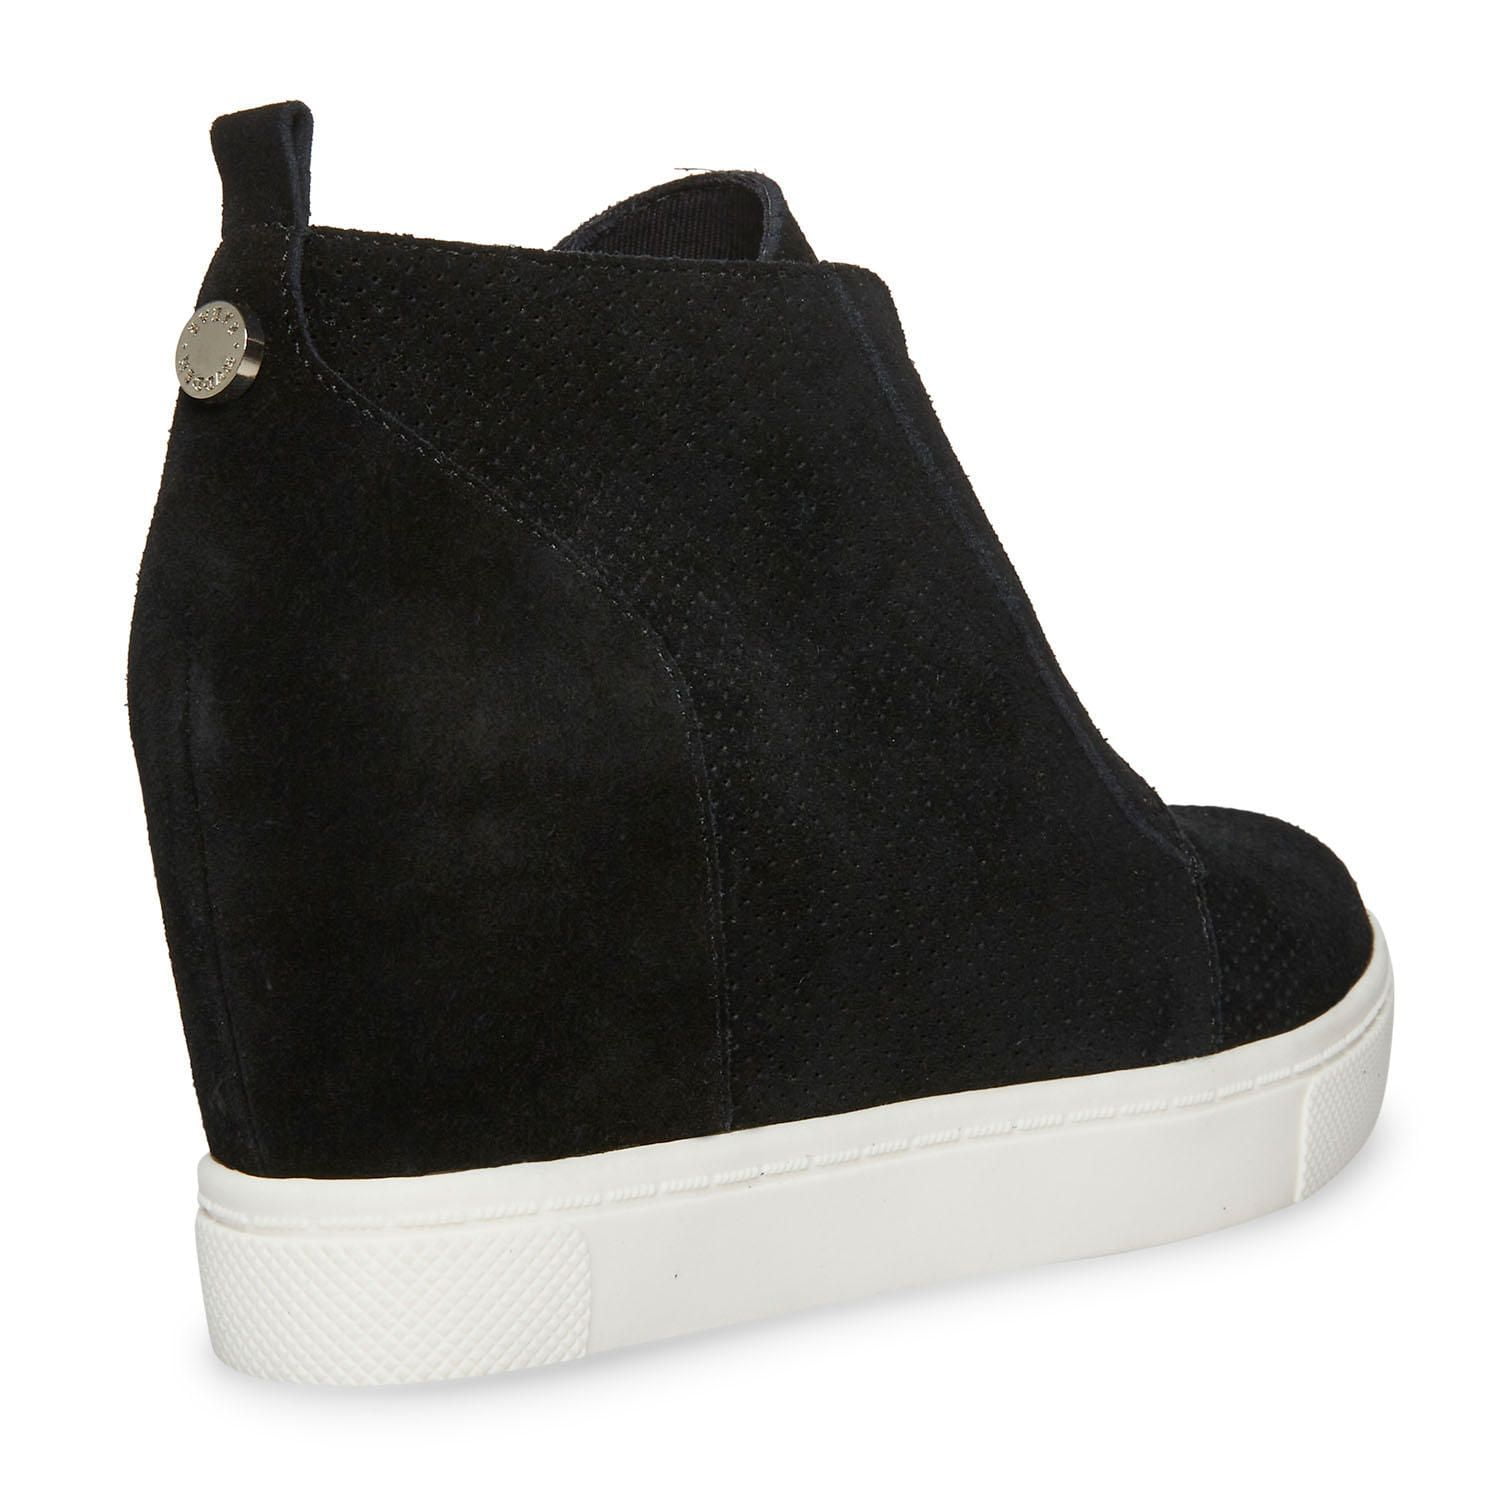 Top more than 254 all black wedge sneakers super hot